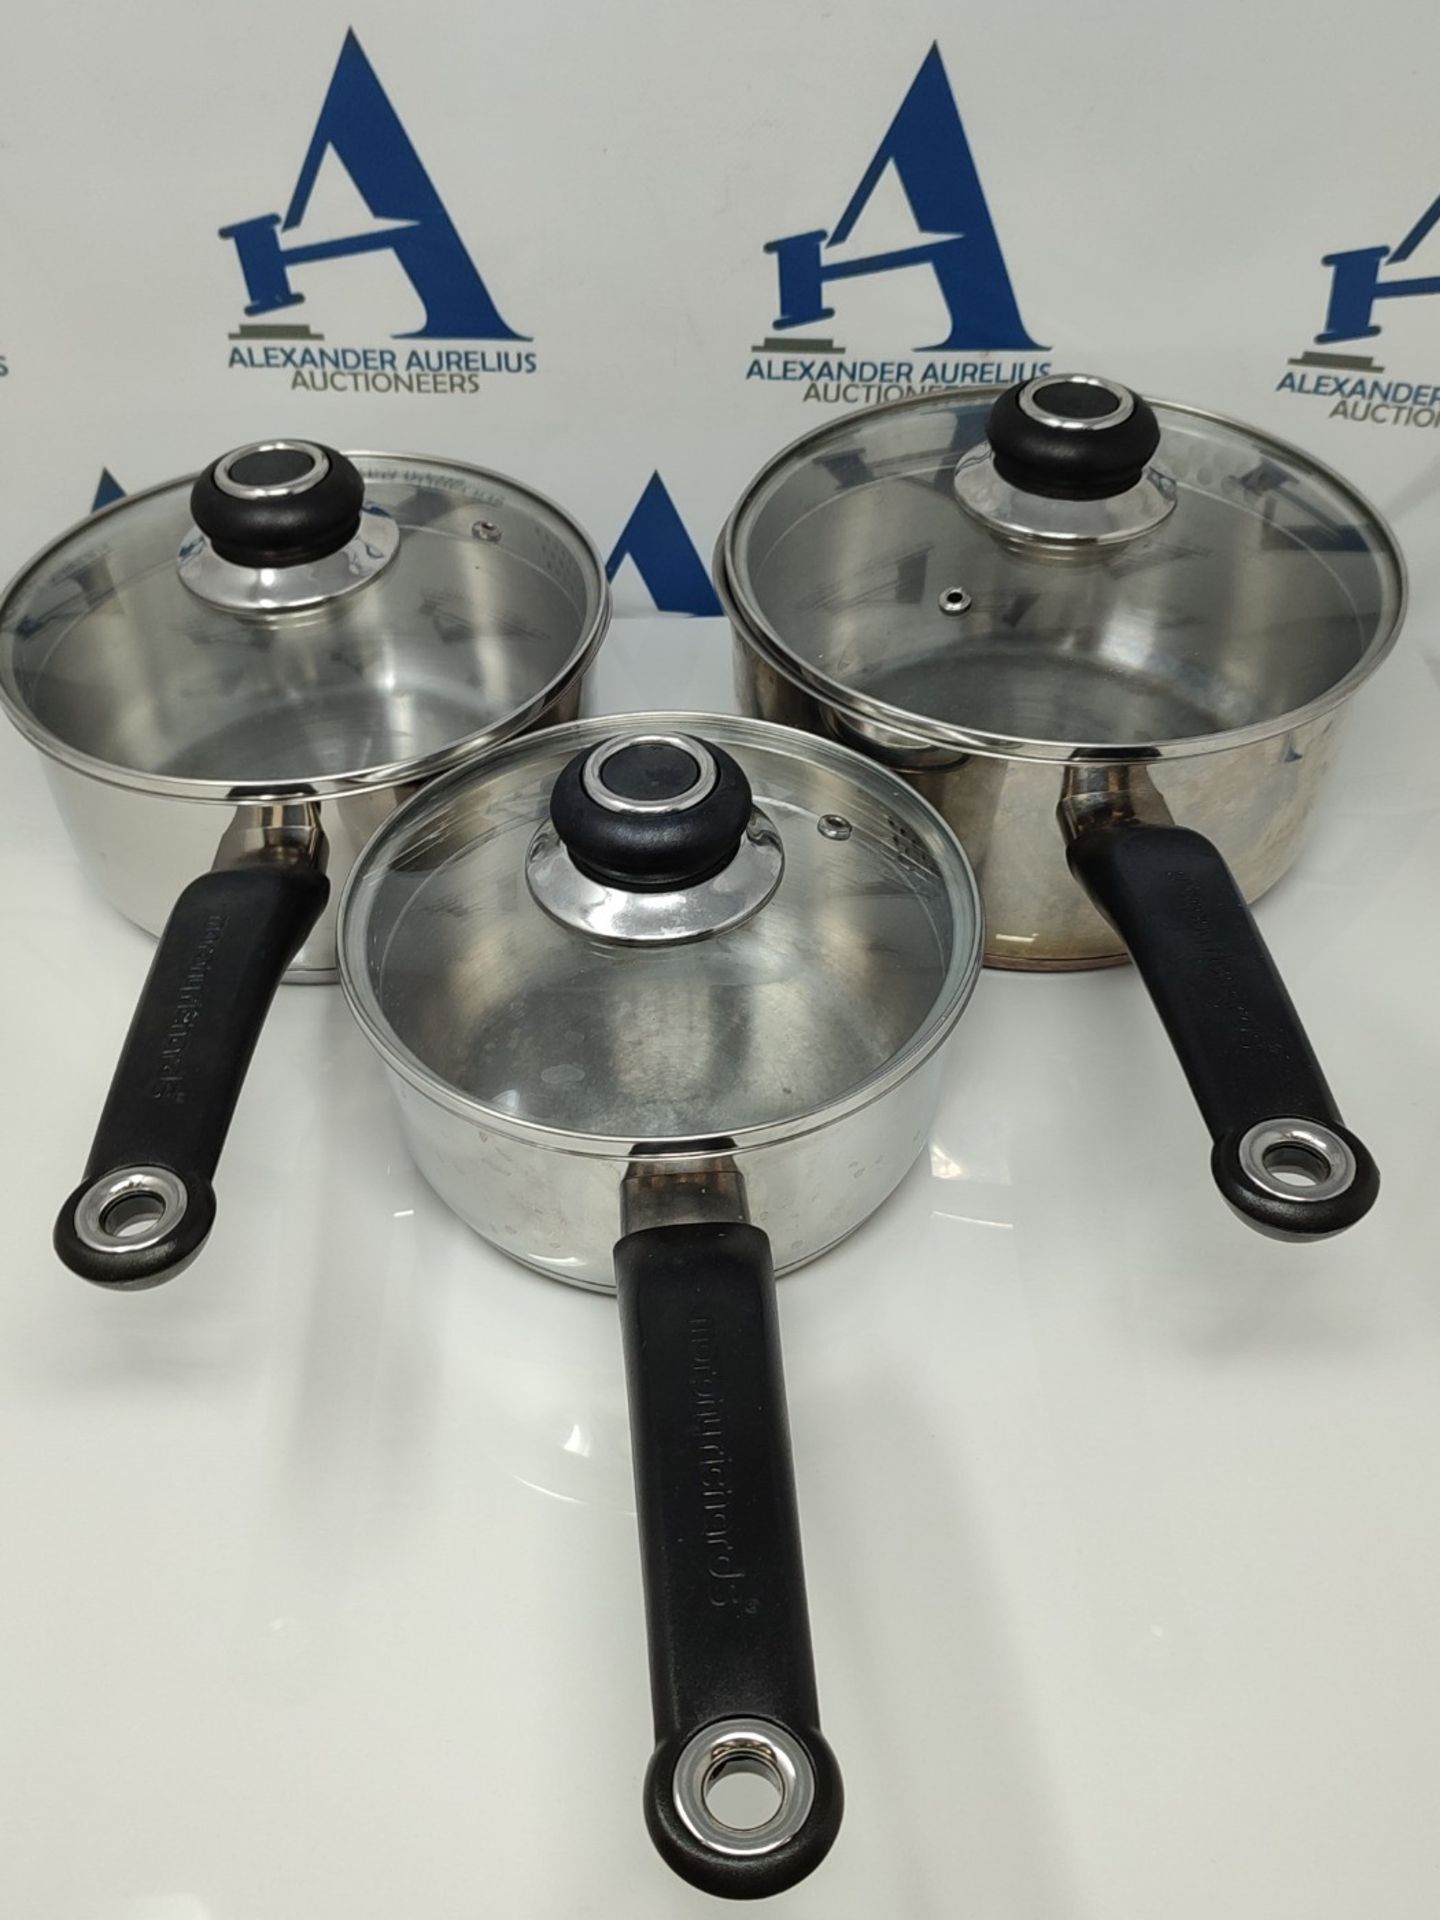 Morphy Richards Equip 3 Piece Pan Set-Stainless Steel, Set of 3 - Image 3 of 3